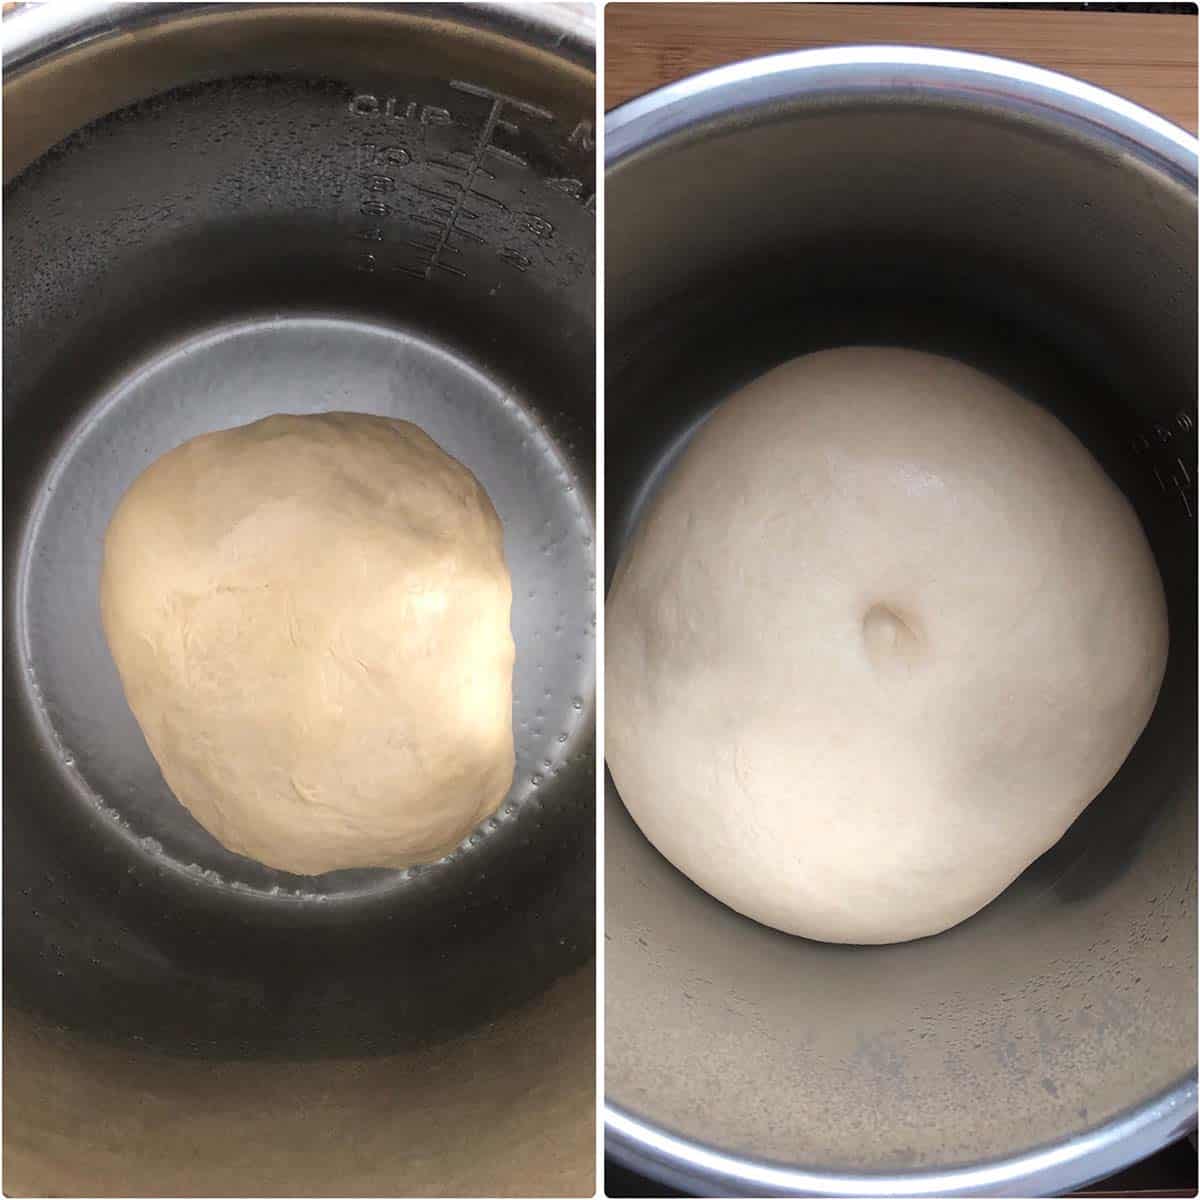 2 panel photo showing the dough before and after proofing.